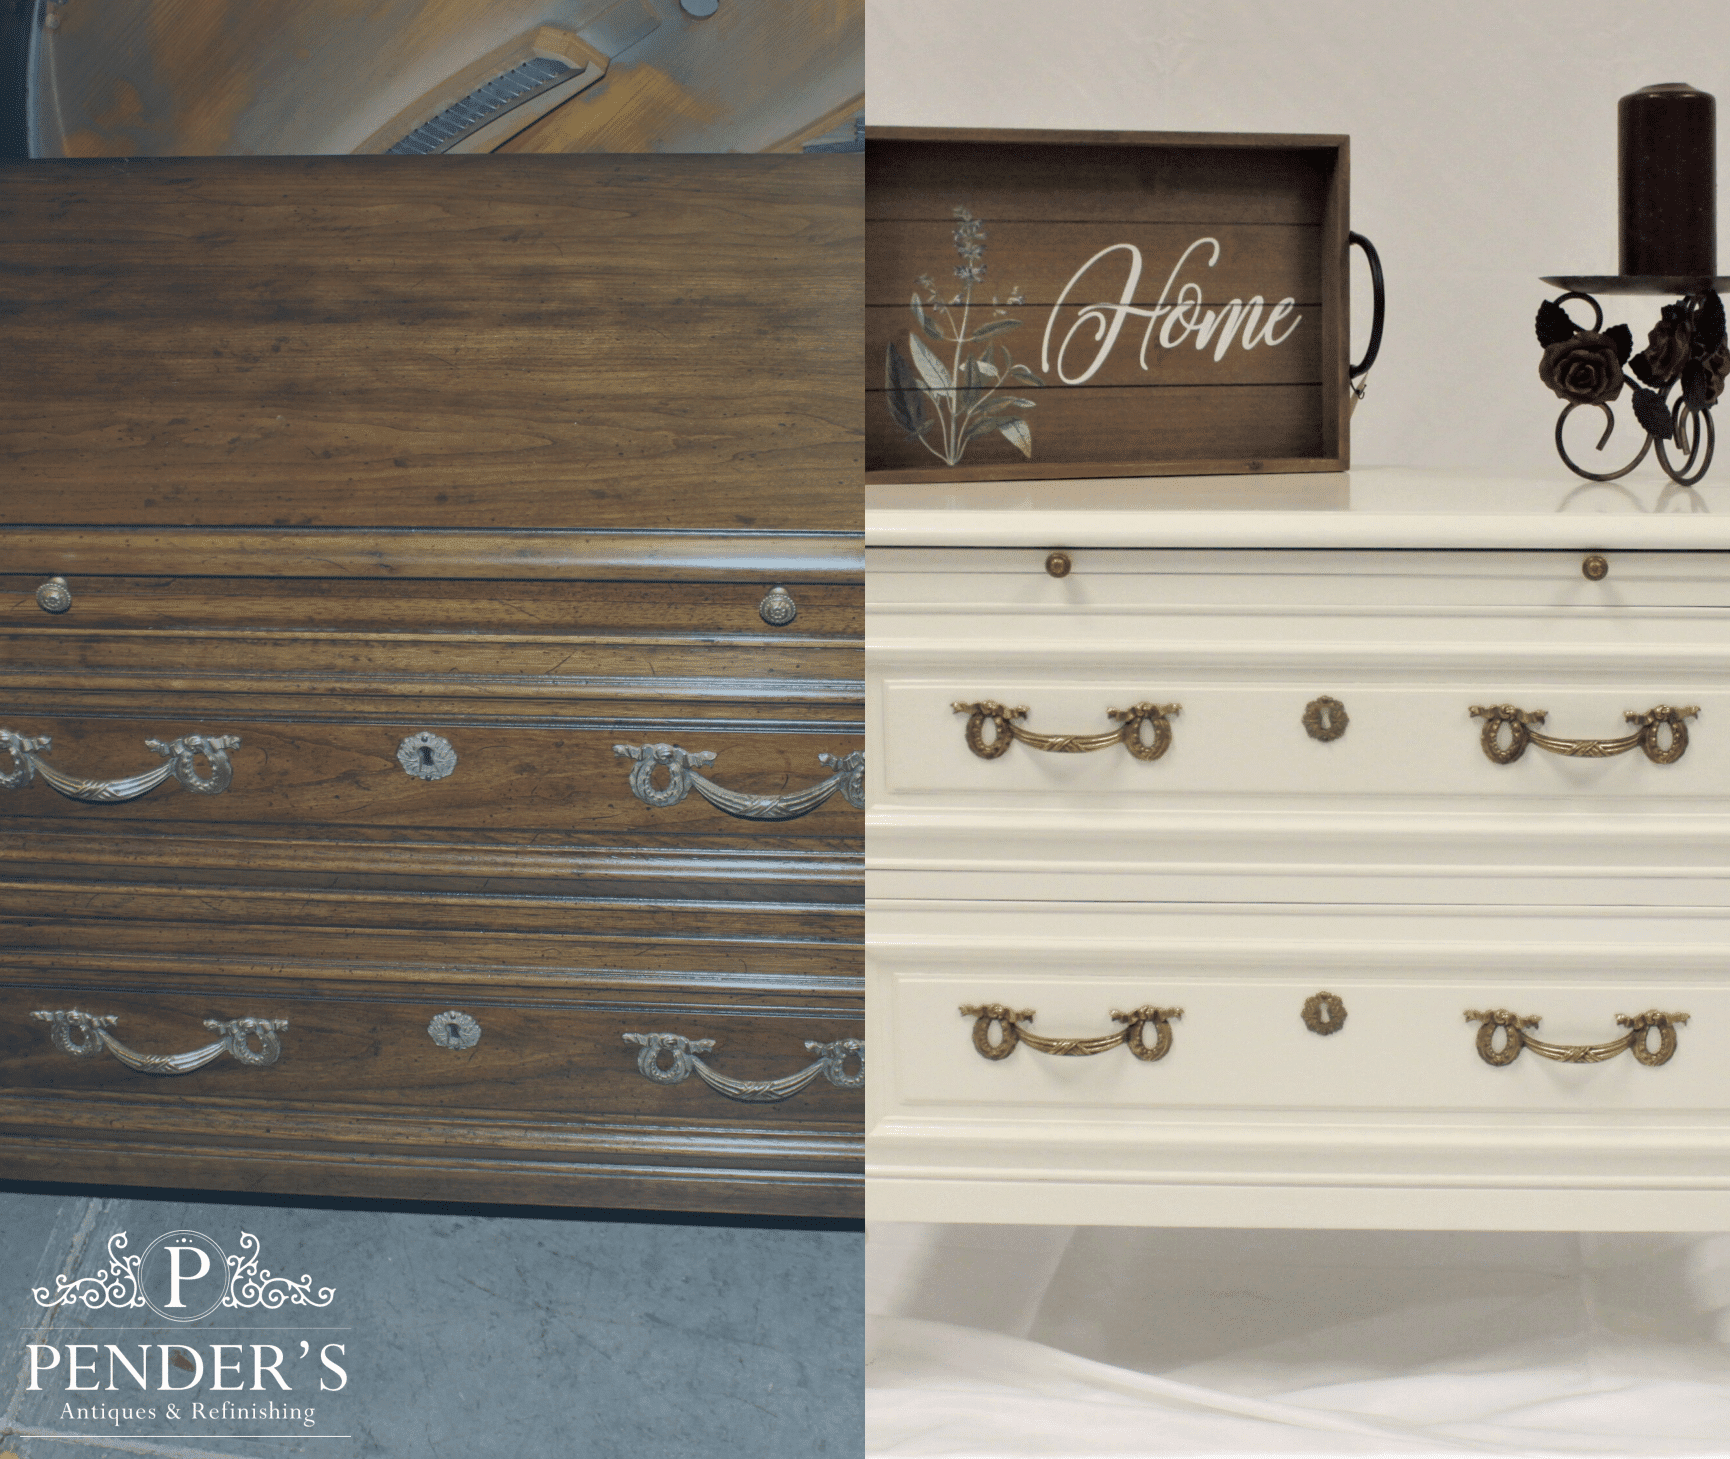 Lacquer Chest completed by Penders